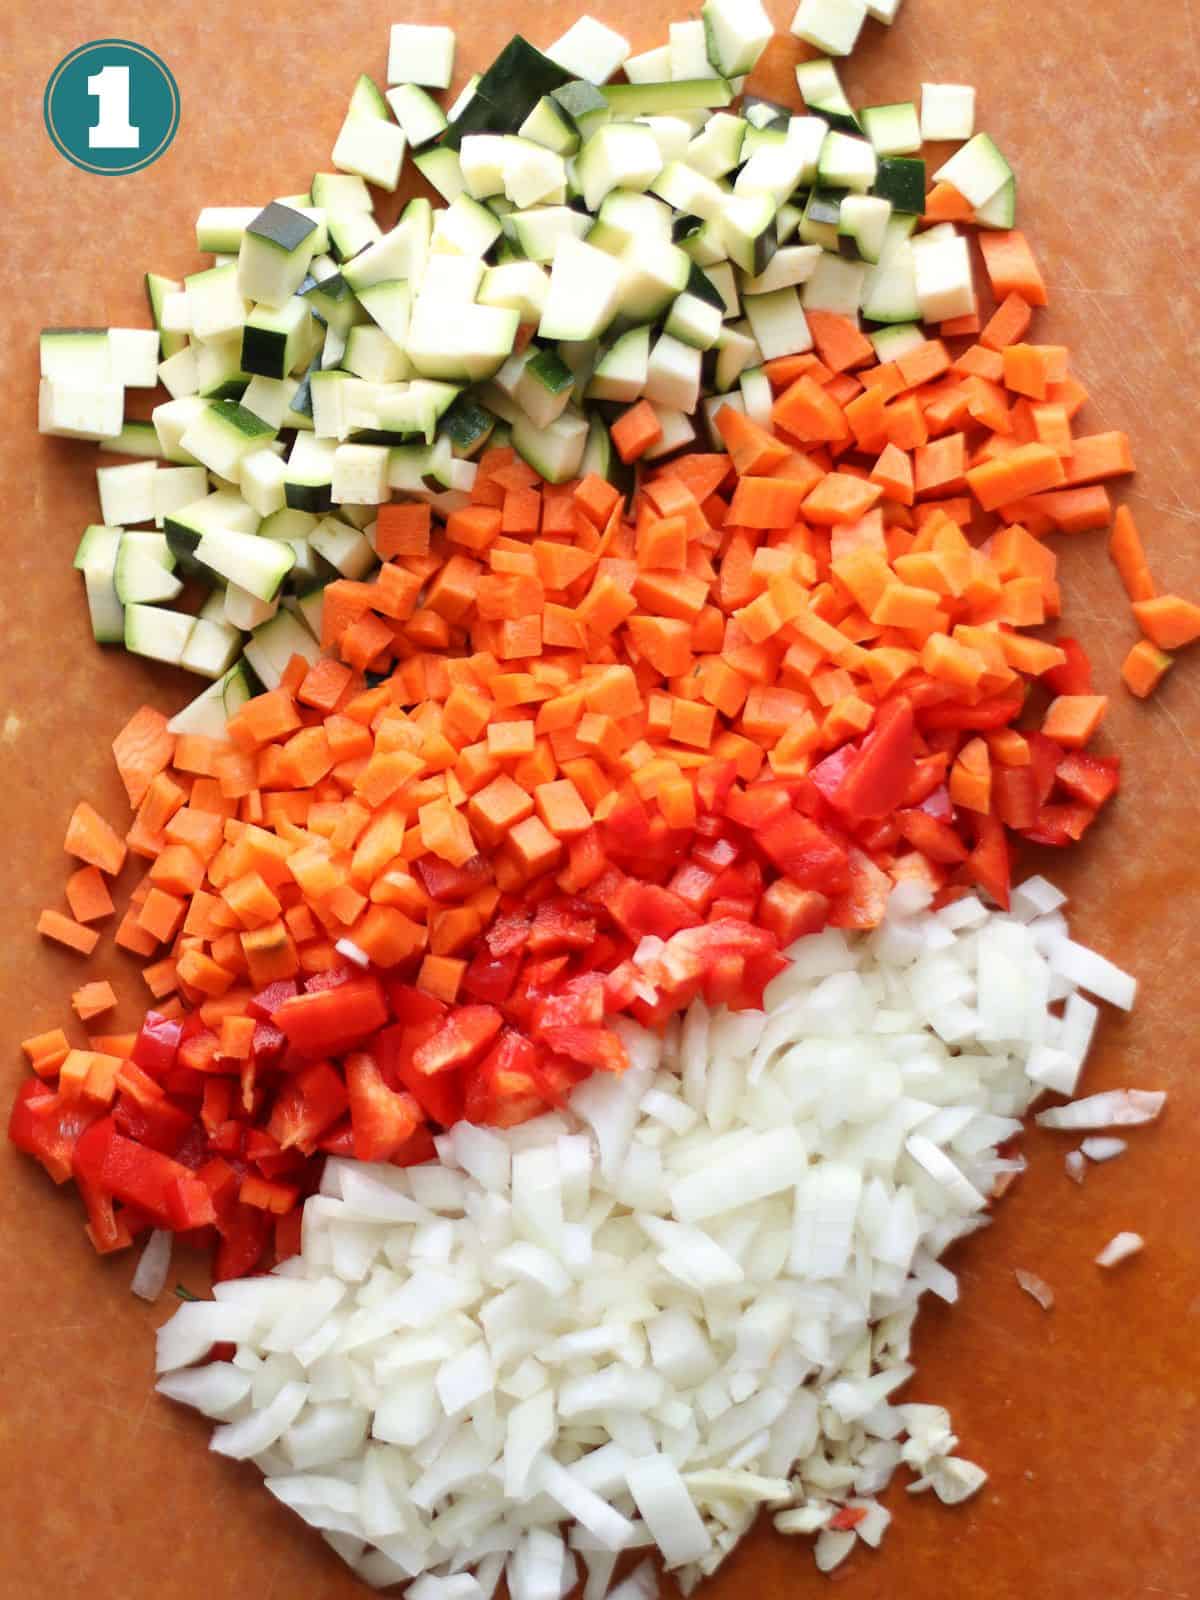 All the veggies chopped on a wooden board.